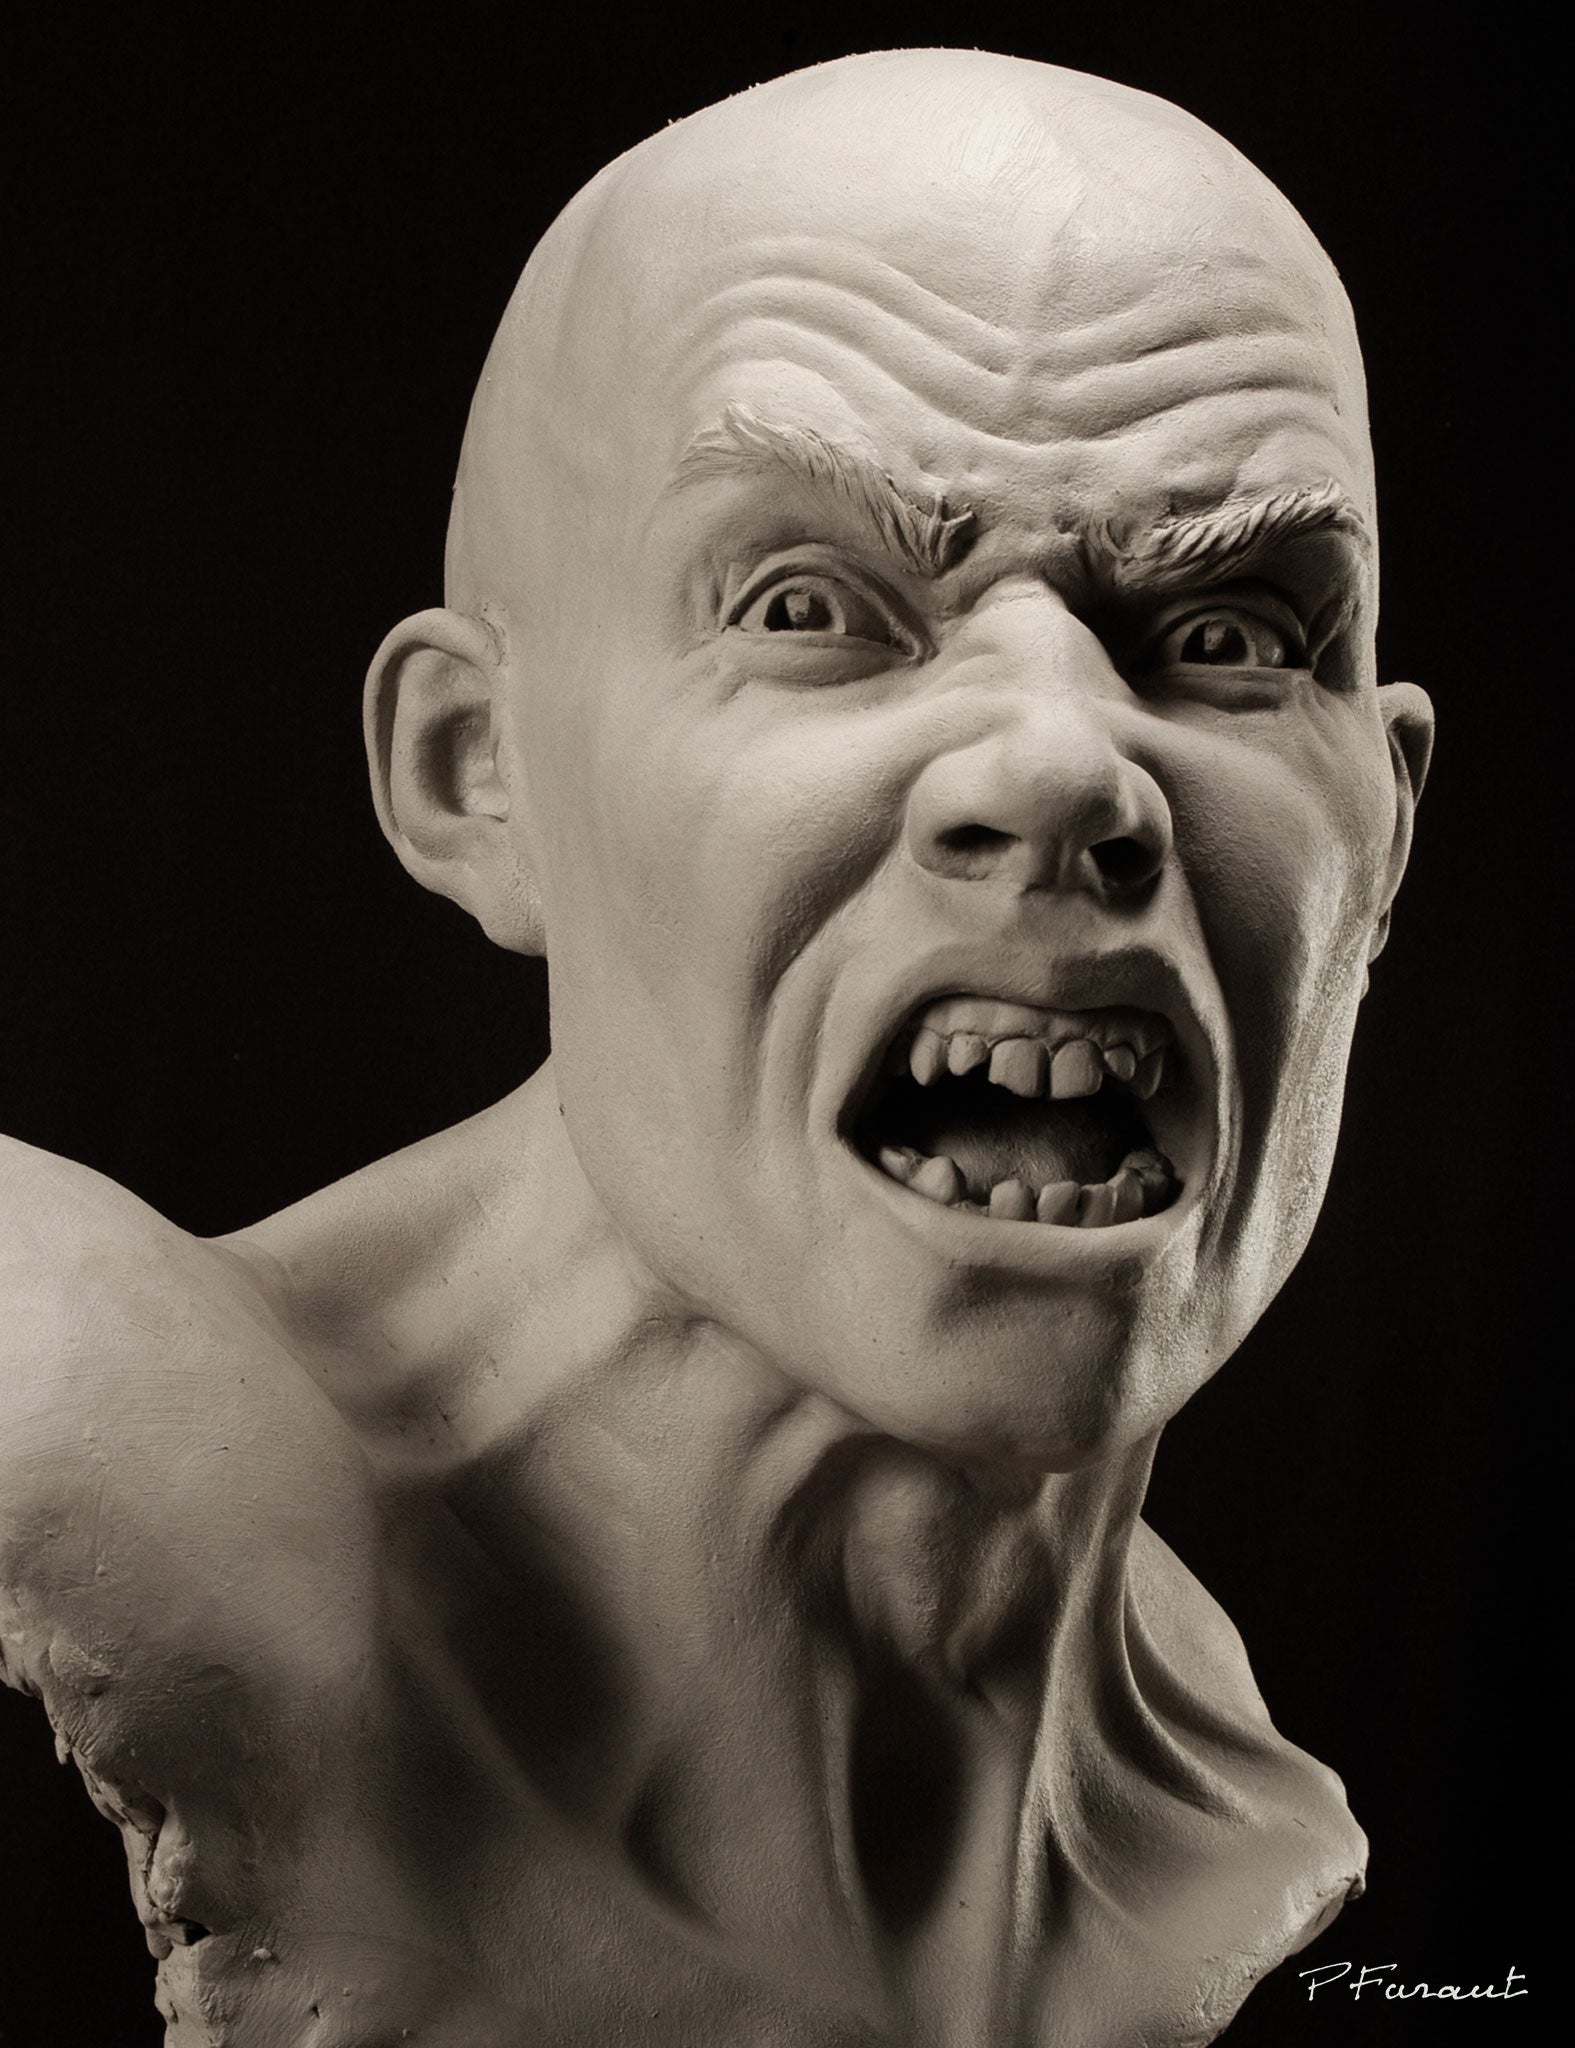 clay portrait screaming man with broken teeth Mutiny by Philippe Faraut